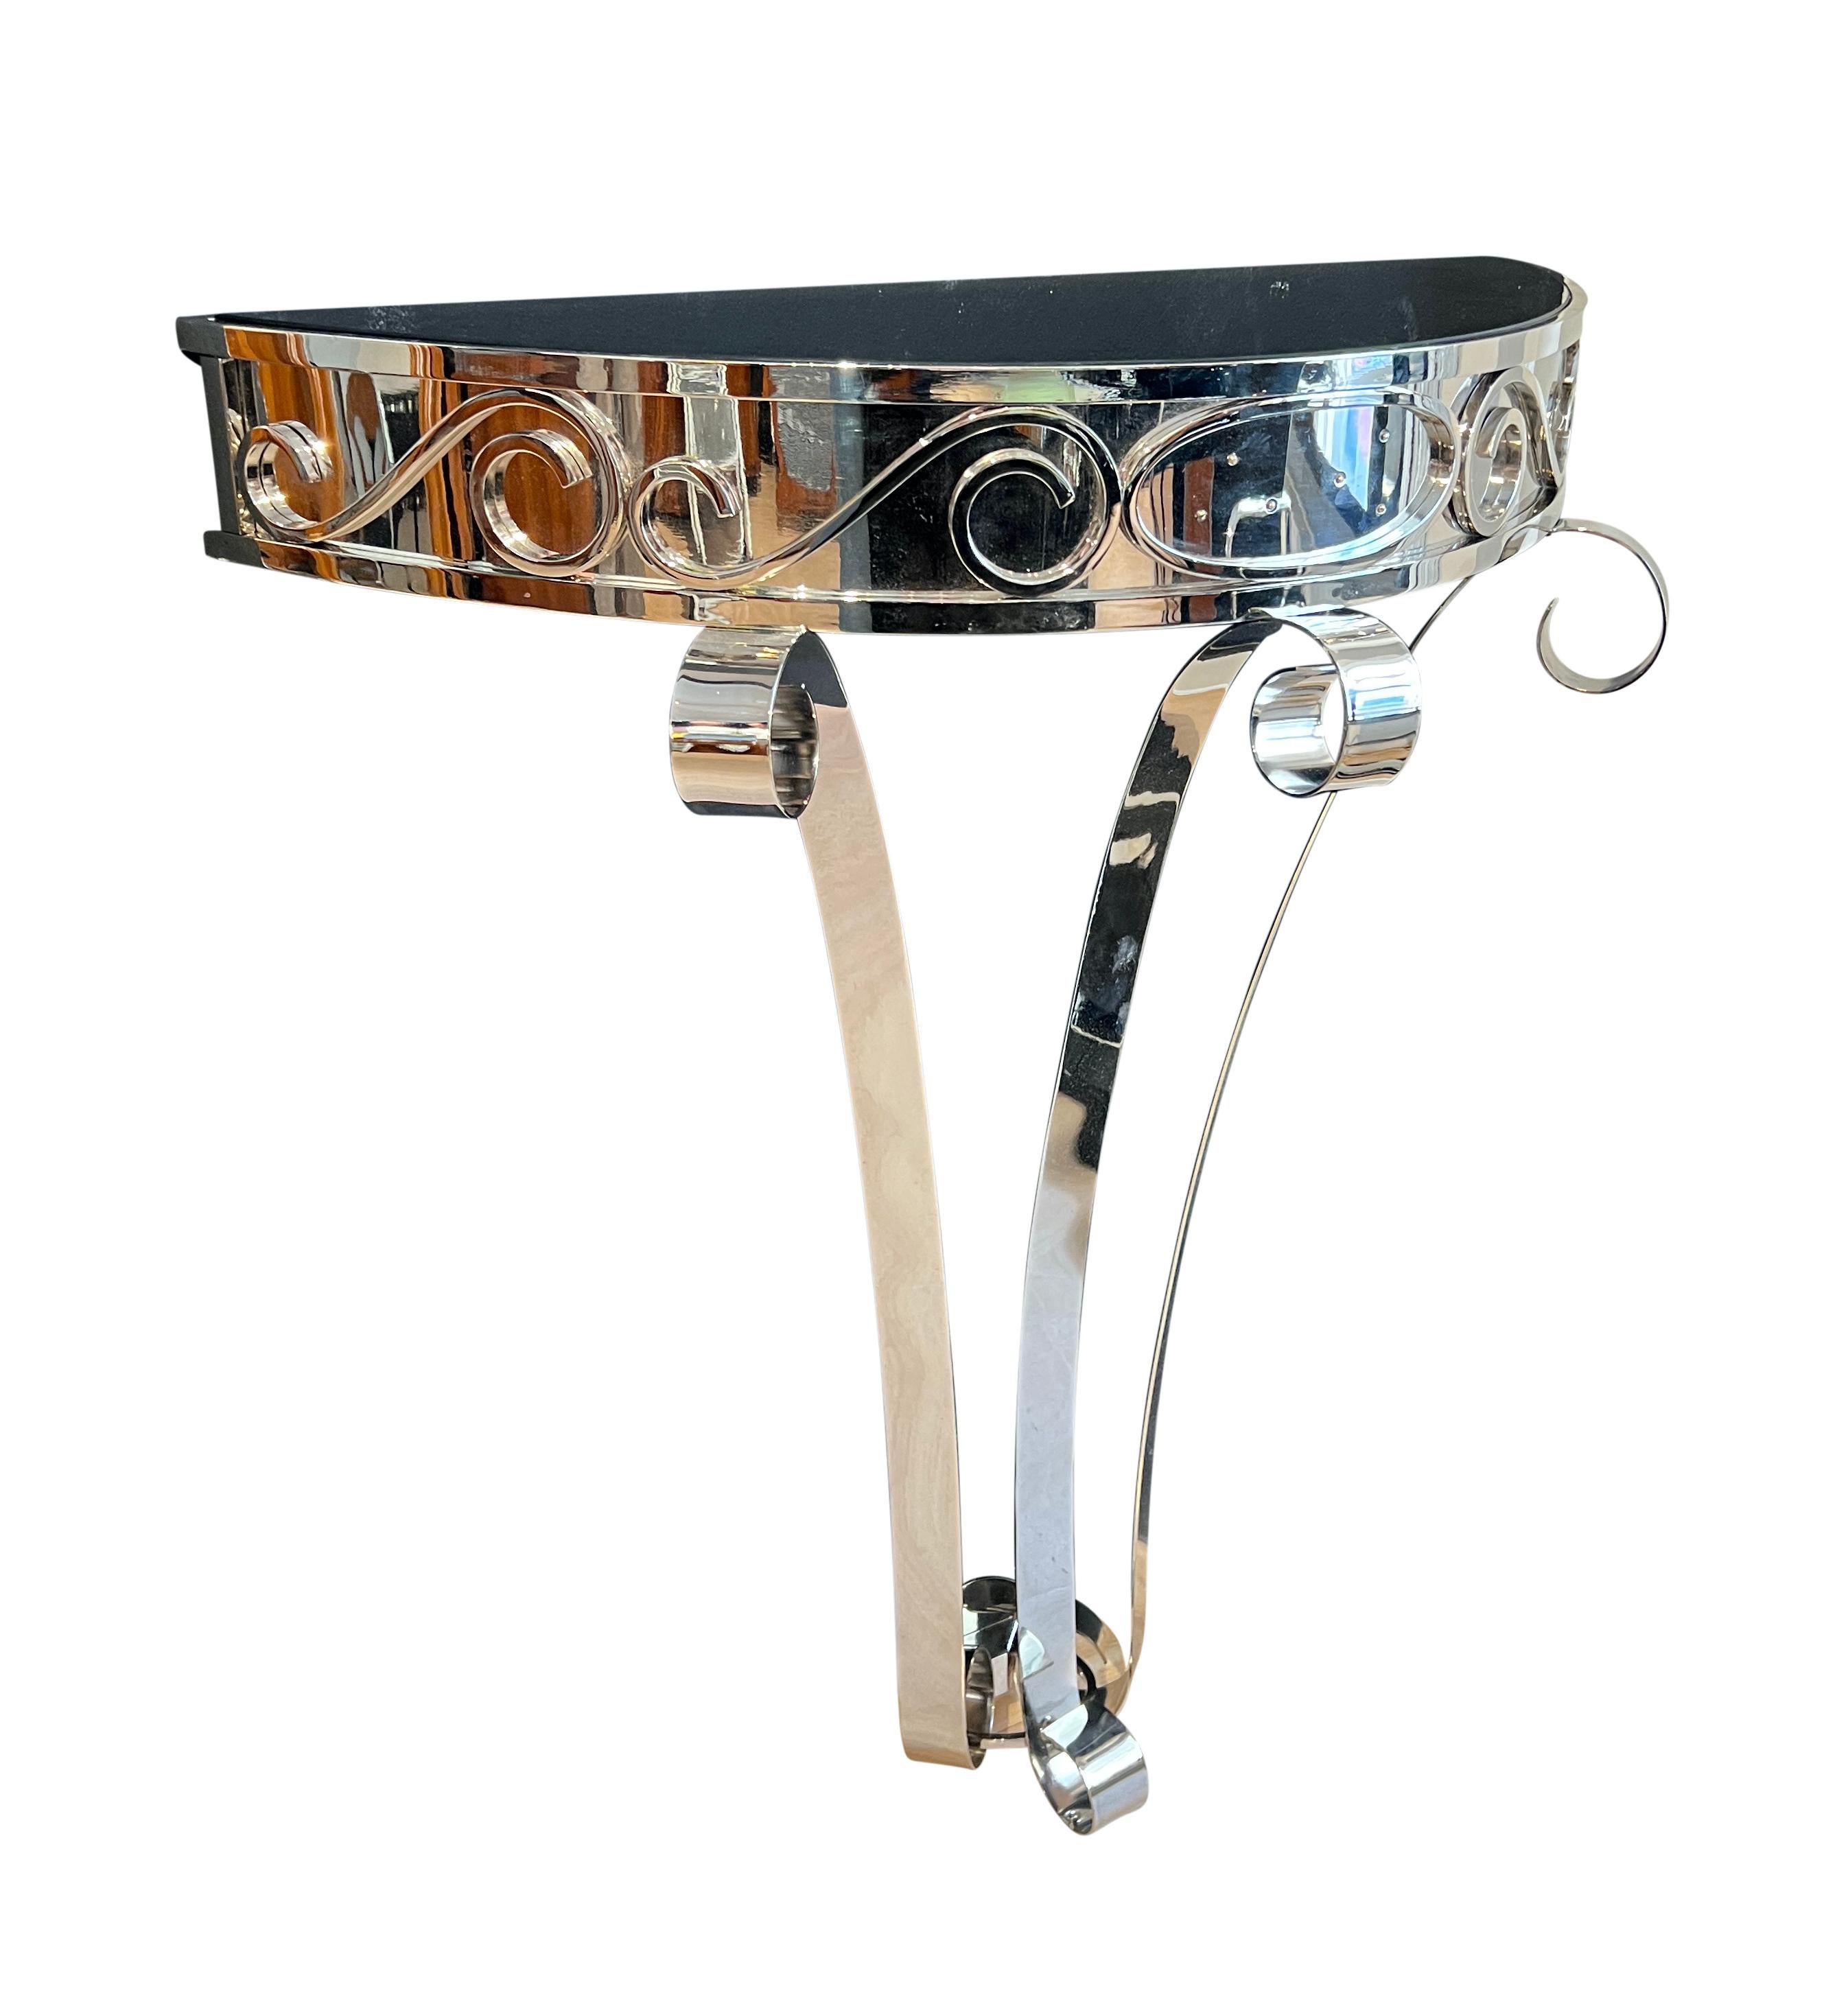 Beautiful Art Deco Demi-lune Console Table, Nickel-Plated Metal, France circa 1930
Metal frame, newly nickel-plated and polished. Top with black lacquered glass plate (newly made, originals still available).
Dimensions: H 86cm x W 75cm x D 35cm